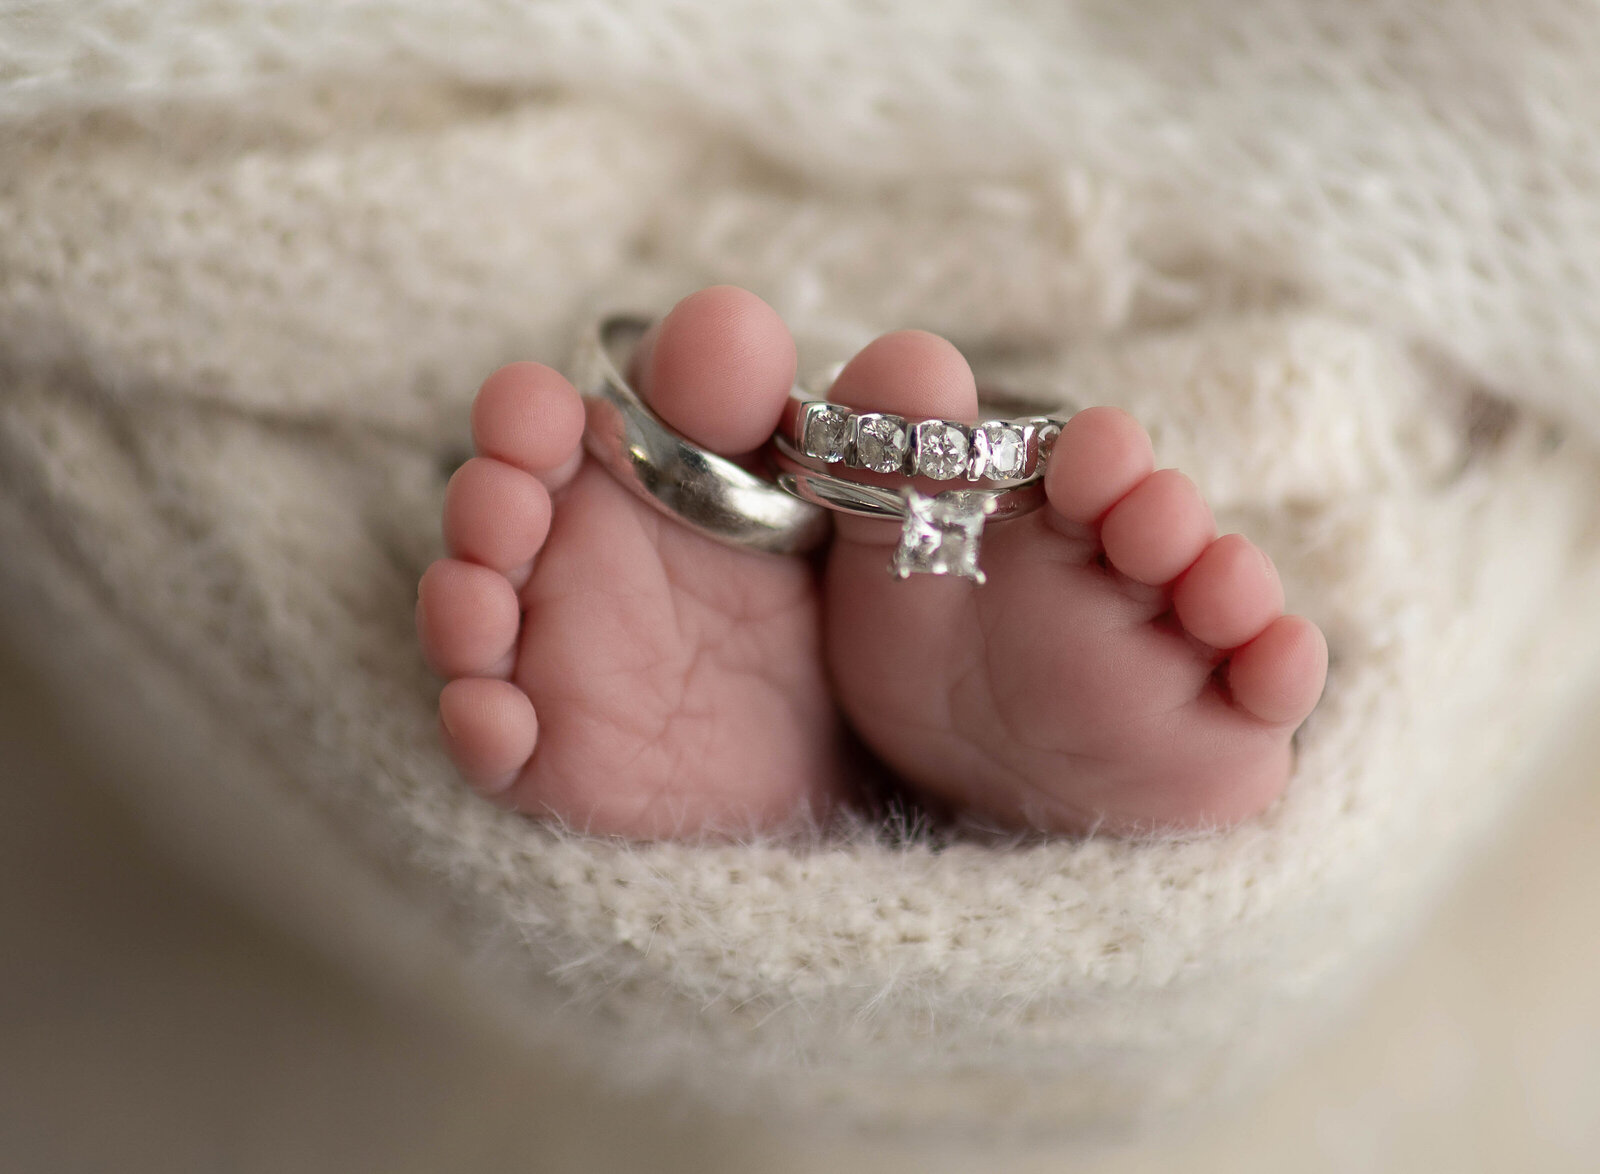 best time for newborn photoshoot